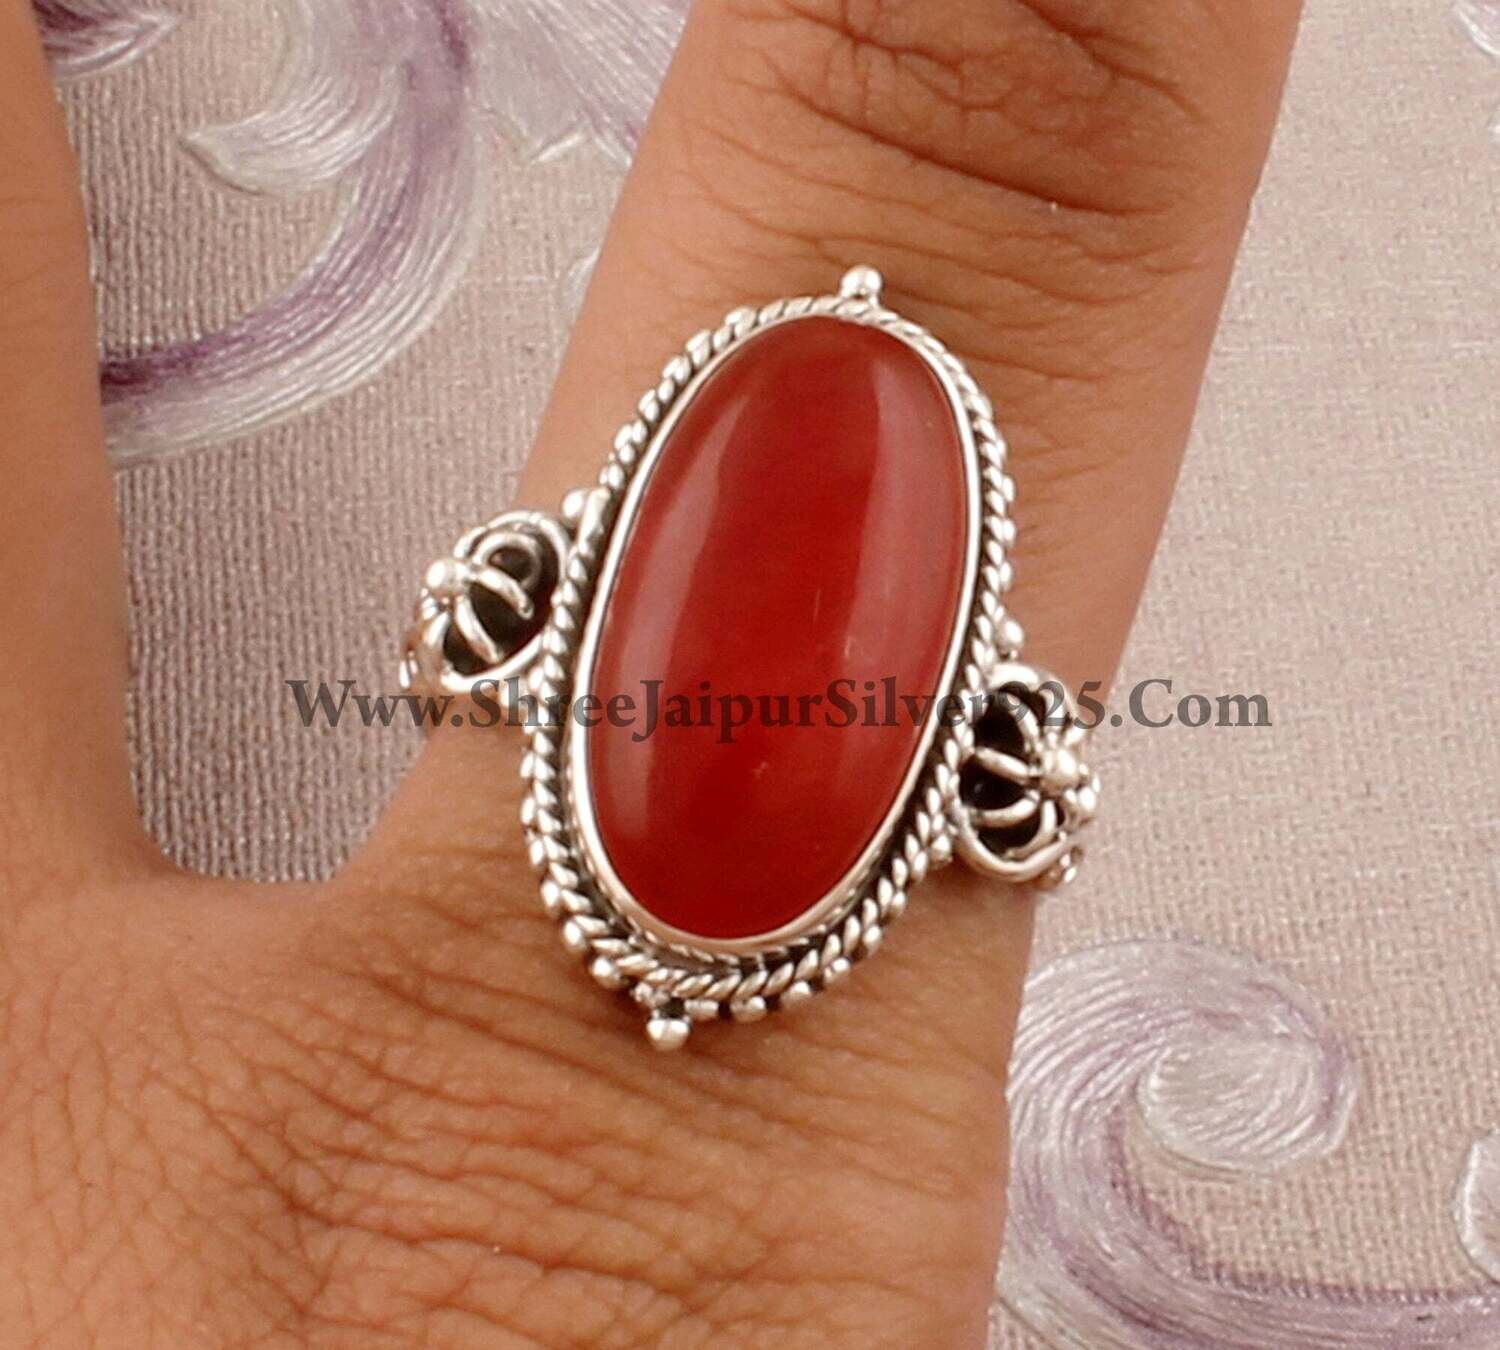 Red Jade Solid 925 Sterling Silver Ring For Women, Oval Jade Gemstone Ring For Her, Boho Silver Handmade Ring For Wedding Anniversary Gift